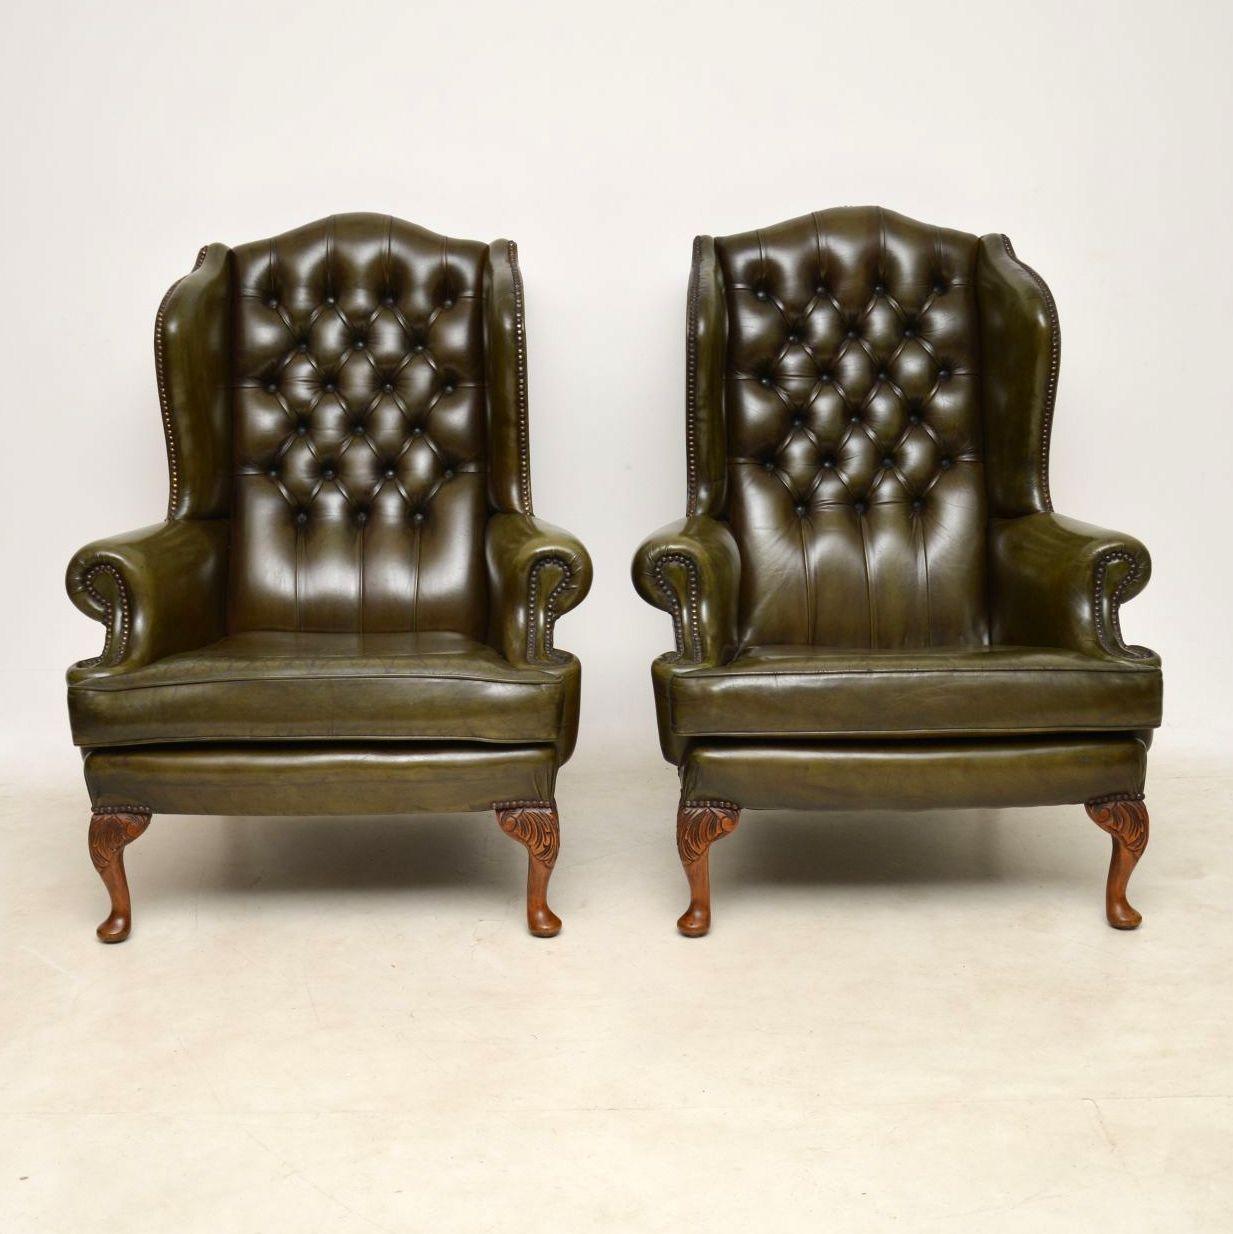 Large pair of antique leather wing armchairs with hump backs, shaped wings, deep buttoned backs and well carved walnut legs. These armchairs are very comfortable with plenty of back support. The green leather is naturally aged and has been polished,